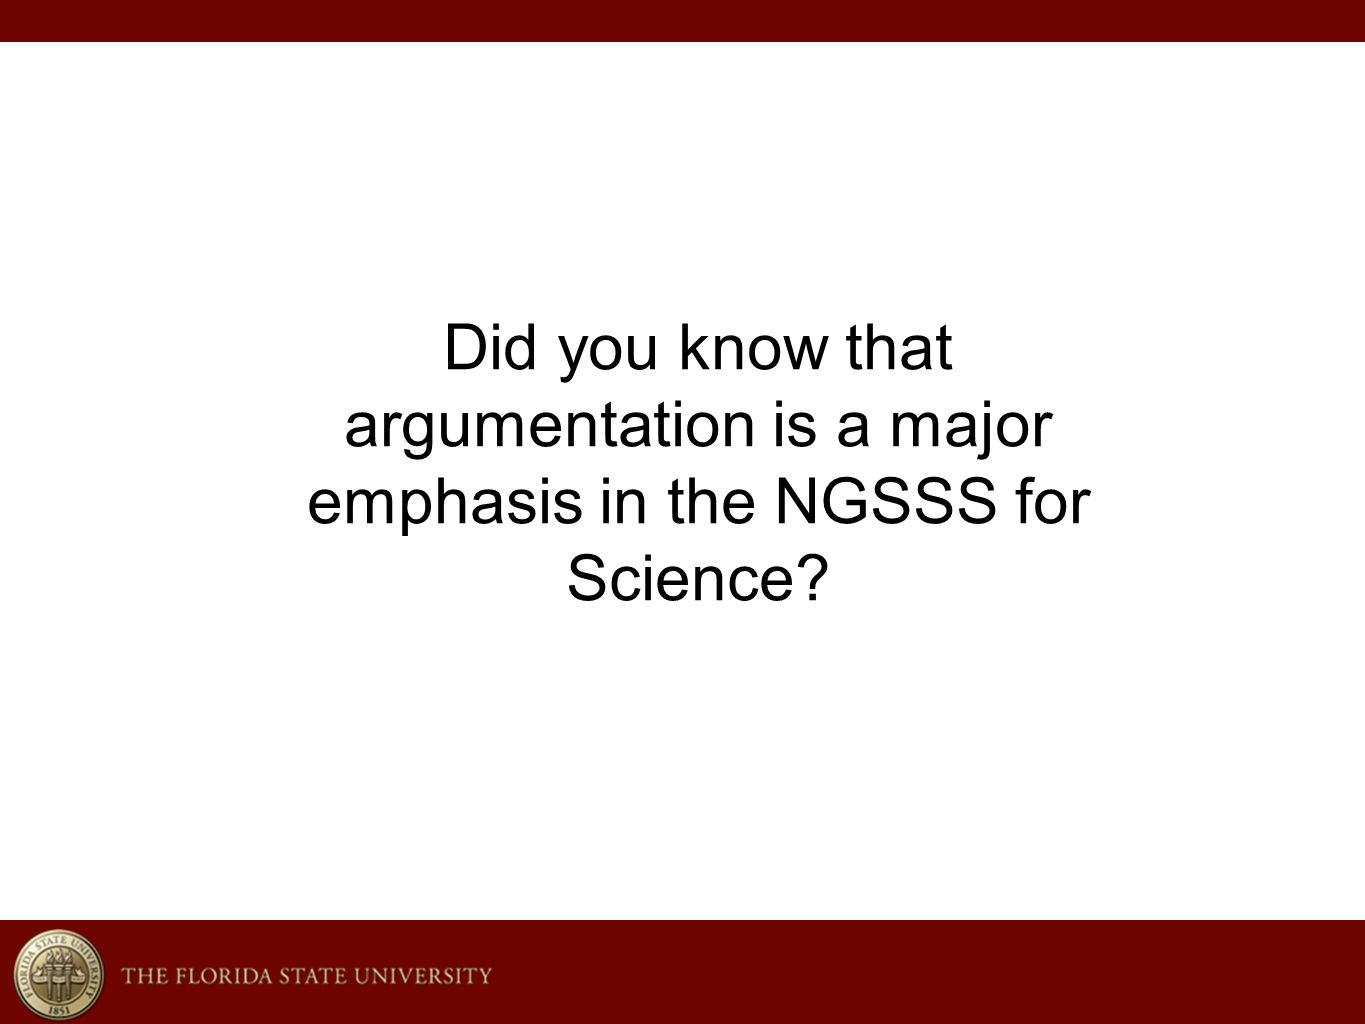 Did you know that argumentation is a major emphasis in the NGSSS for Science